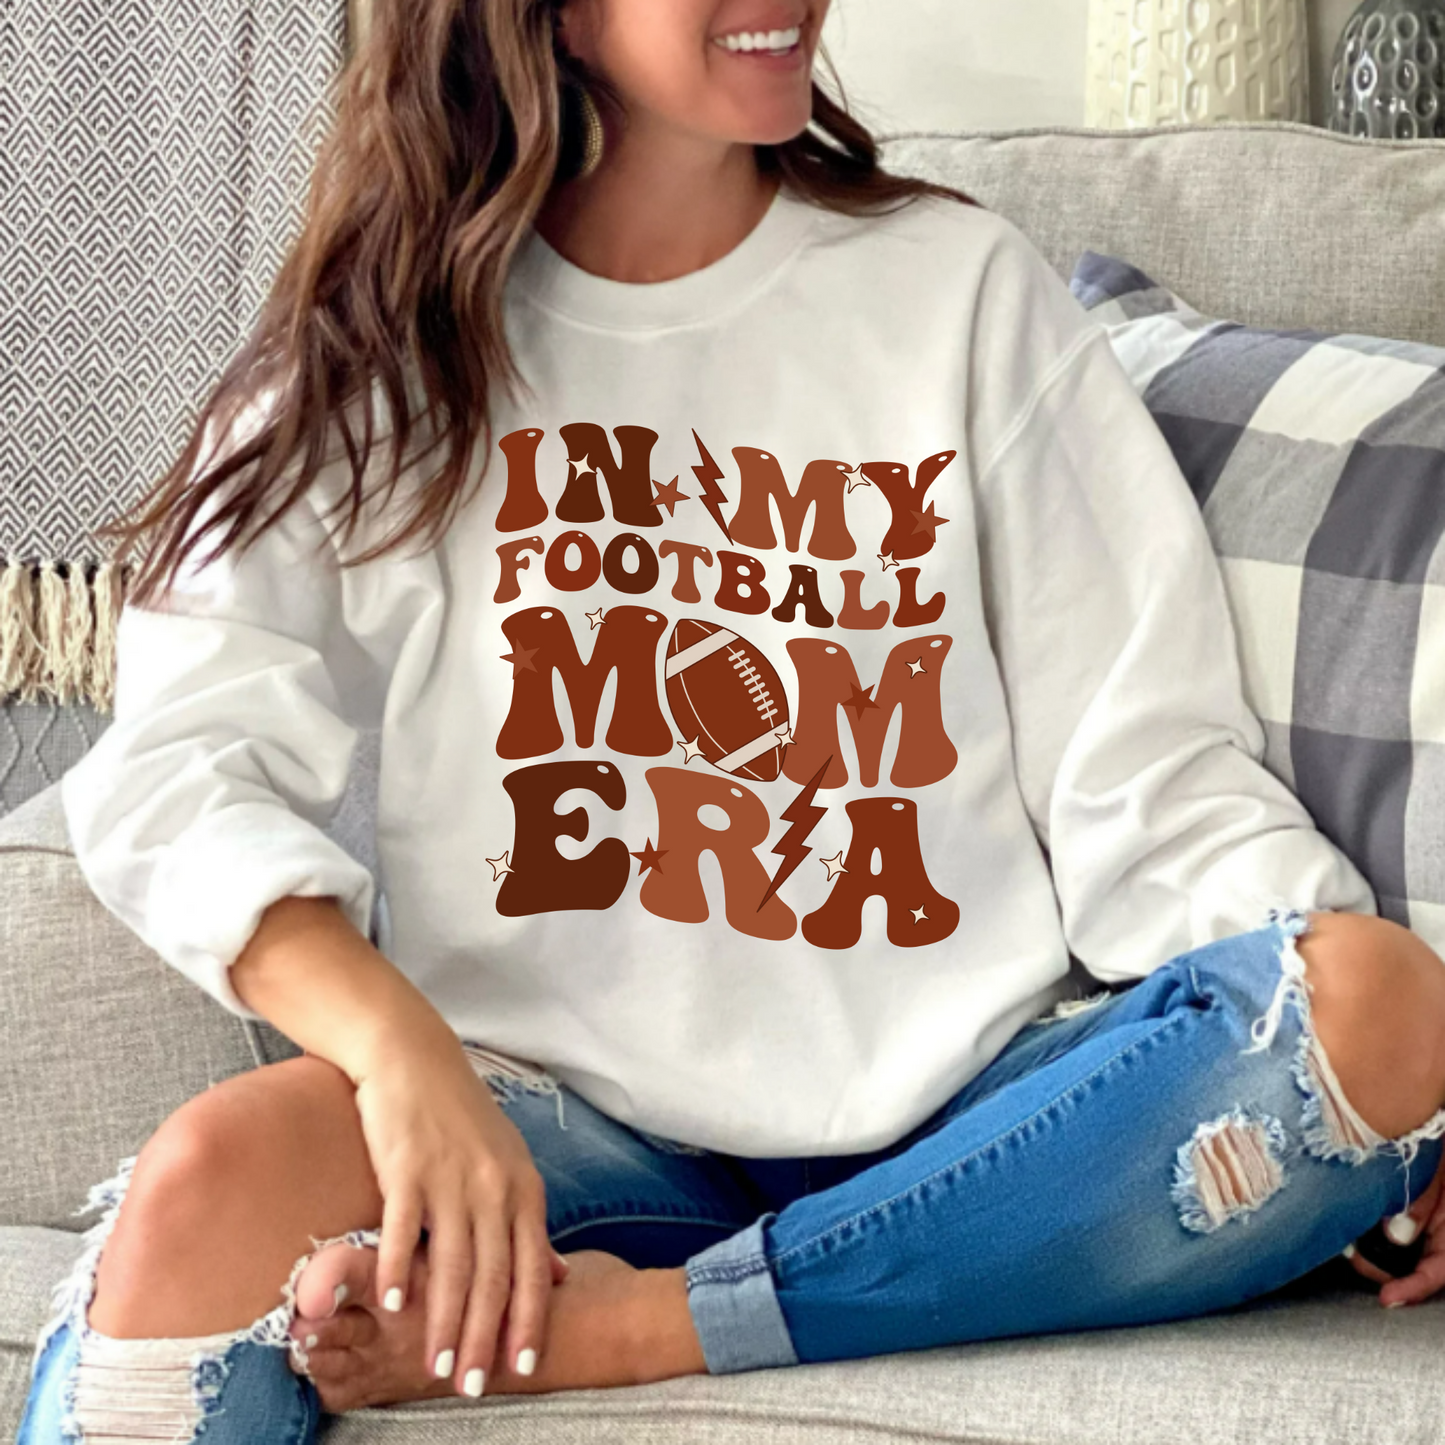 (shirt not included) In My Football Mom Era - Clear Film Transfer